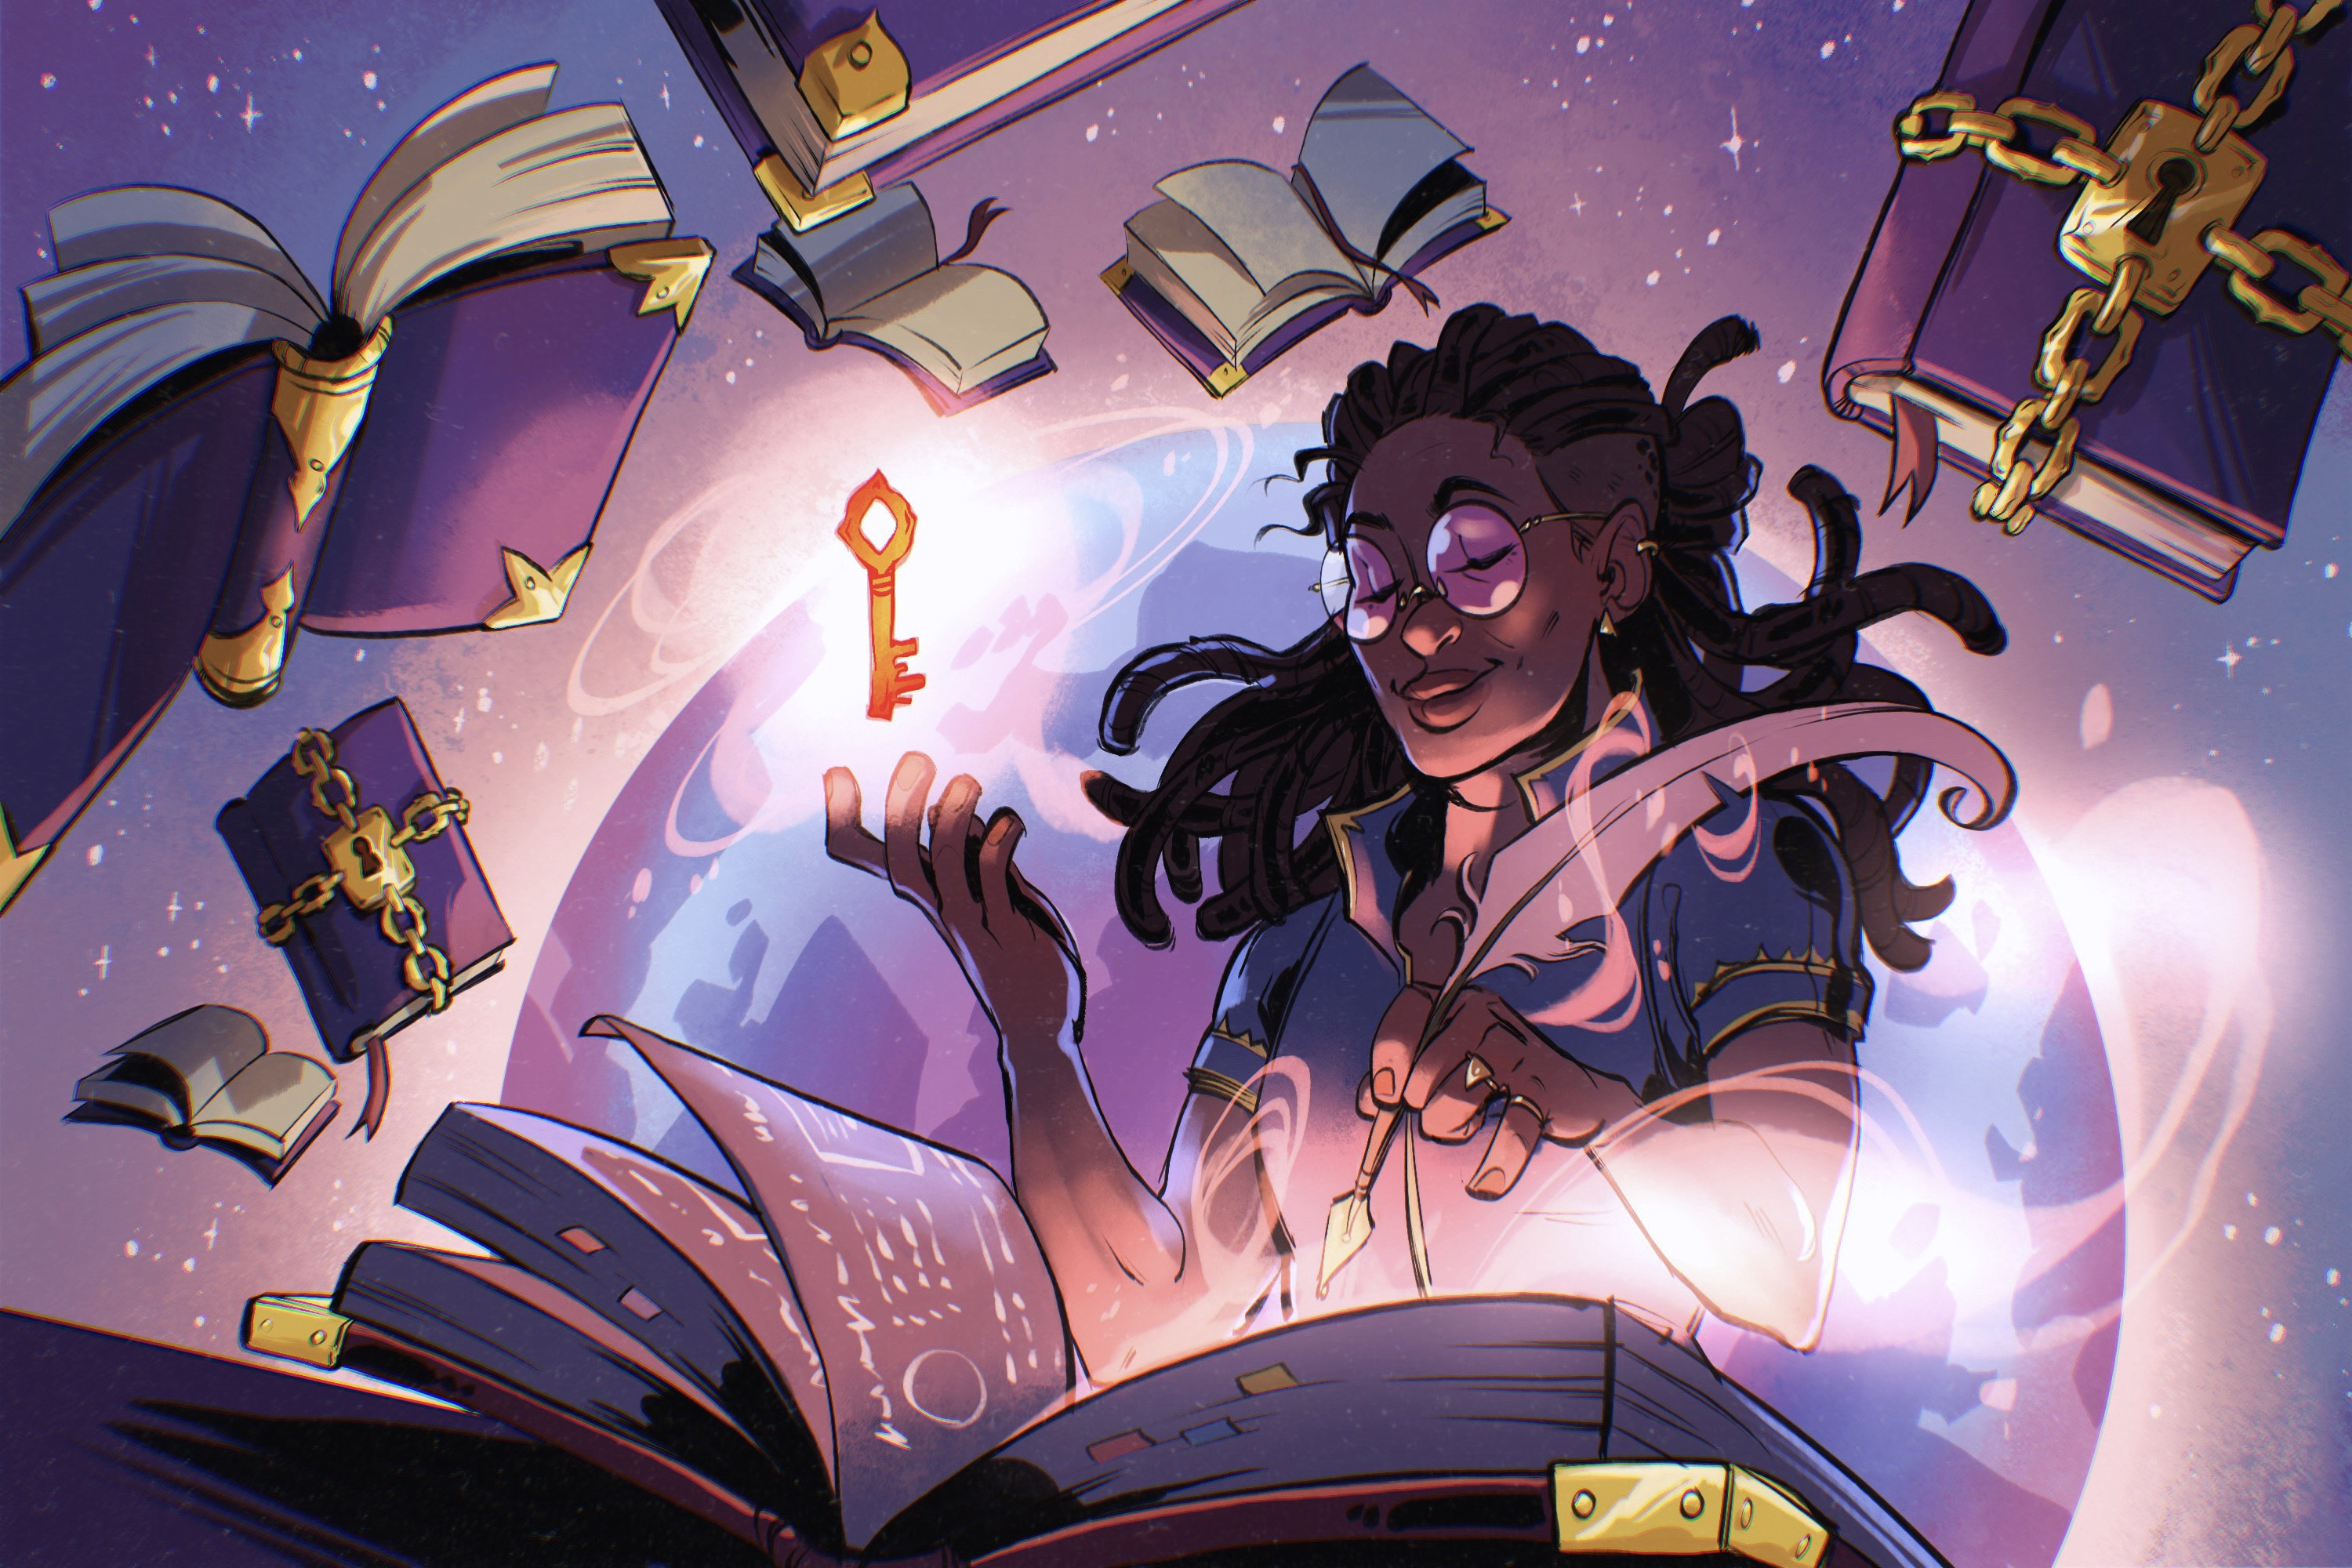 An illustration shows a tabletop RPG character sorting legal issues in a book